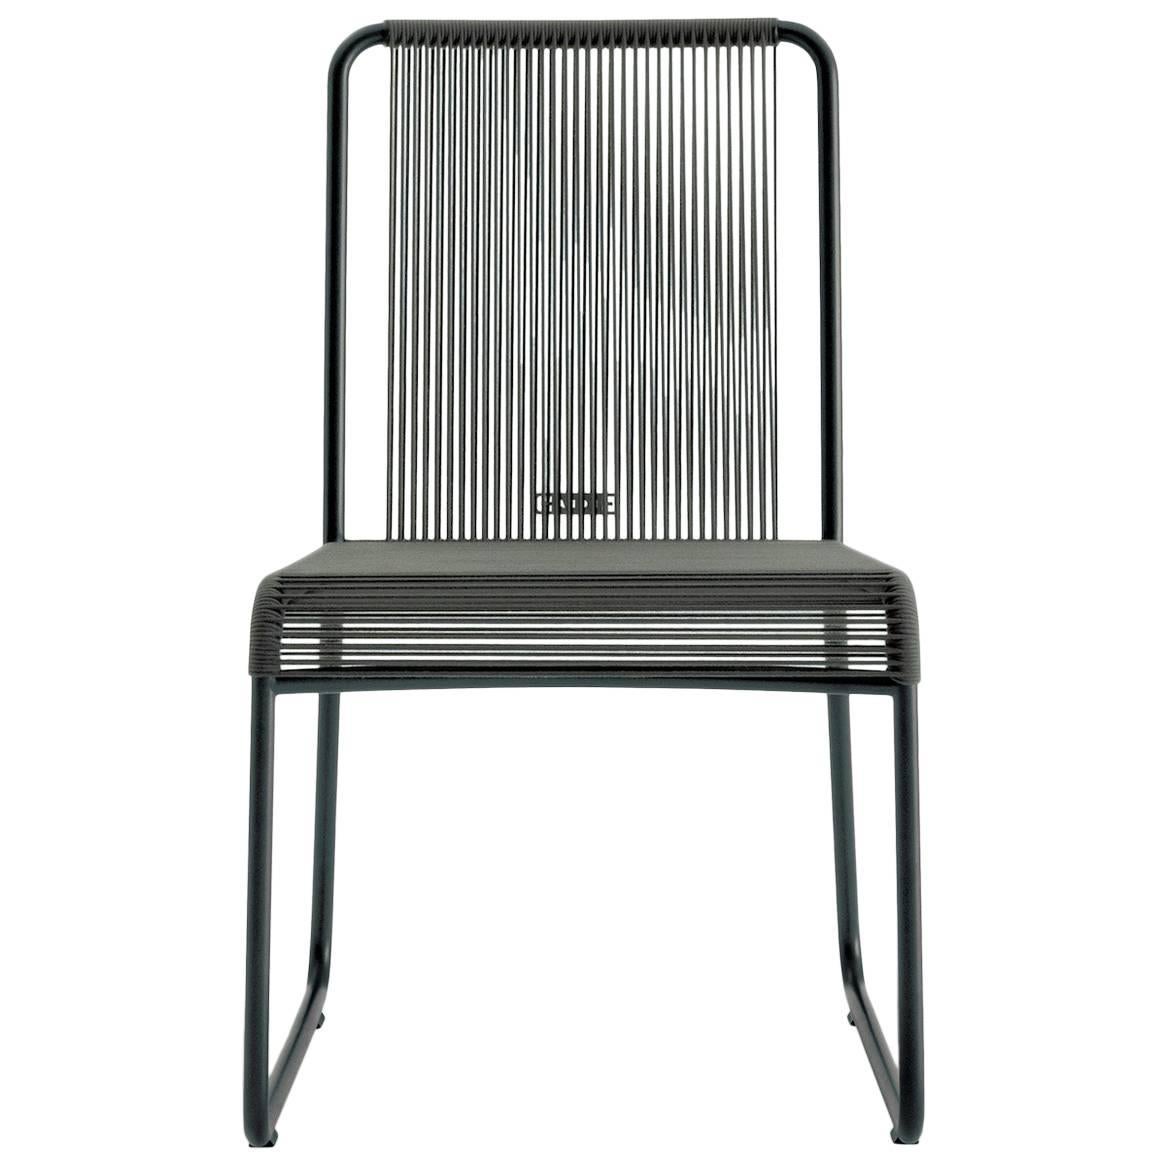 Roda Harp Dining Chair Without Arms for Outdoors/Indoors in 5 Color Combinations For Sale